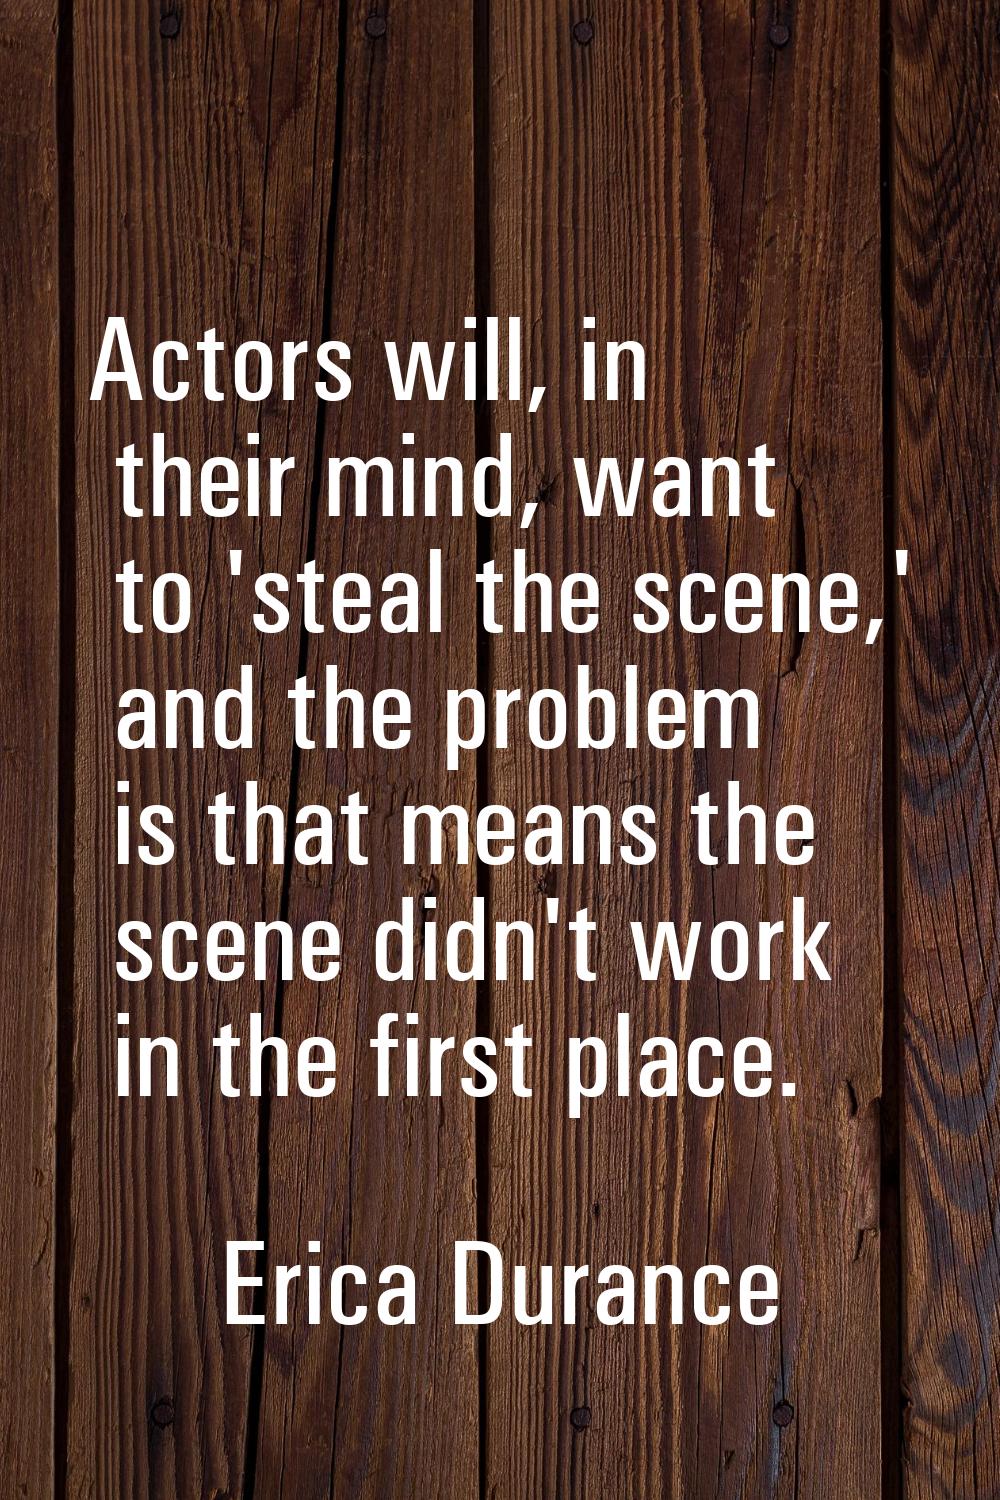 Actors will, in their mind, want to 'steal the scene,' and the problem is that means the scene didn